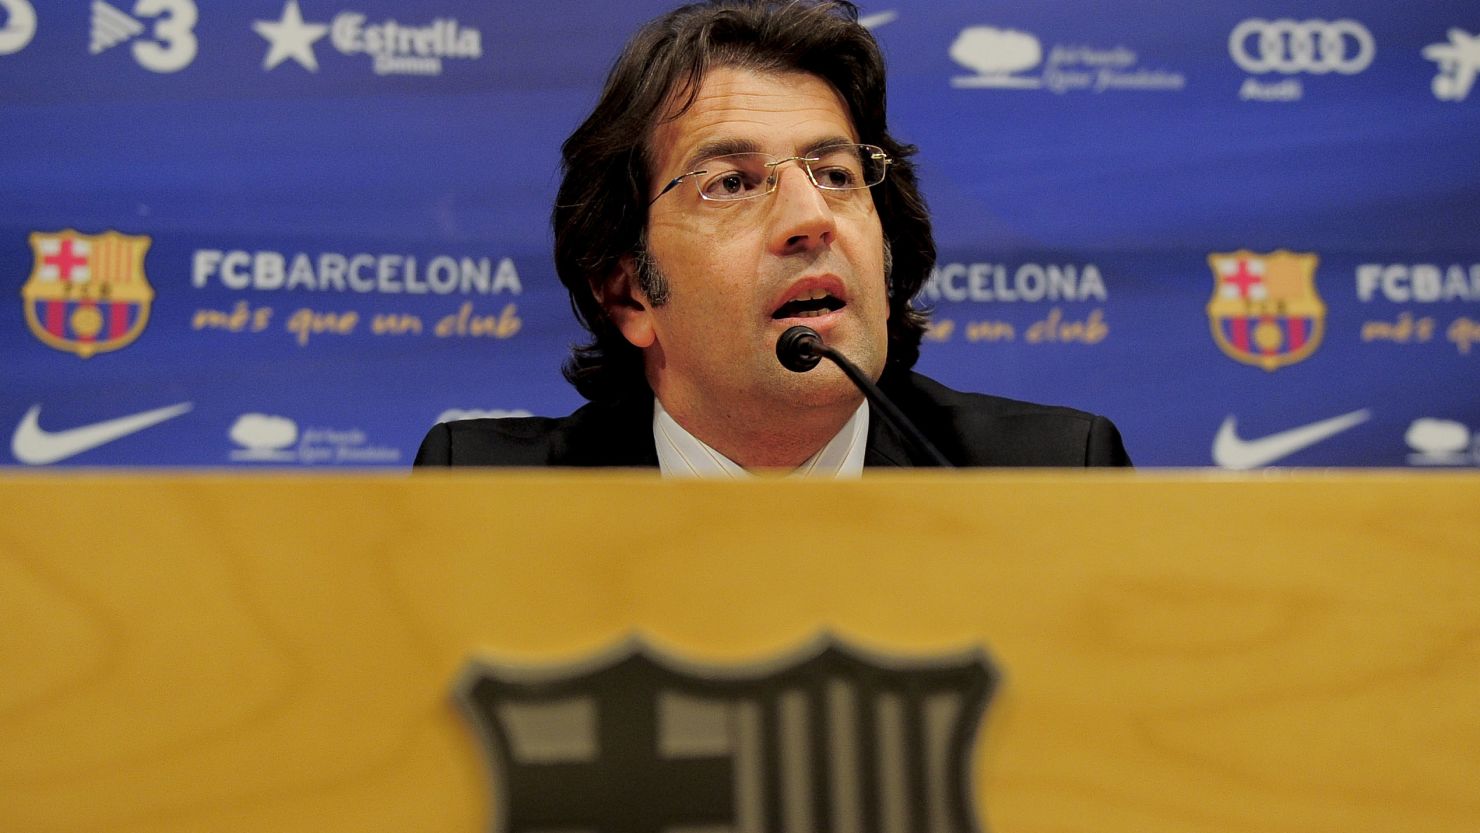 Barcelona spokesman Toni Freixa said the Catalan giants would be investigating the allegations it spied on its own players.